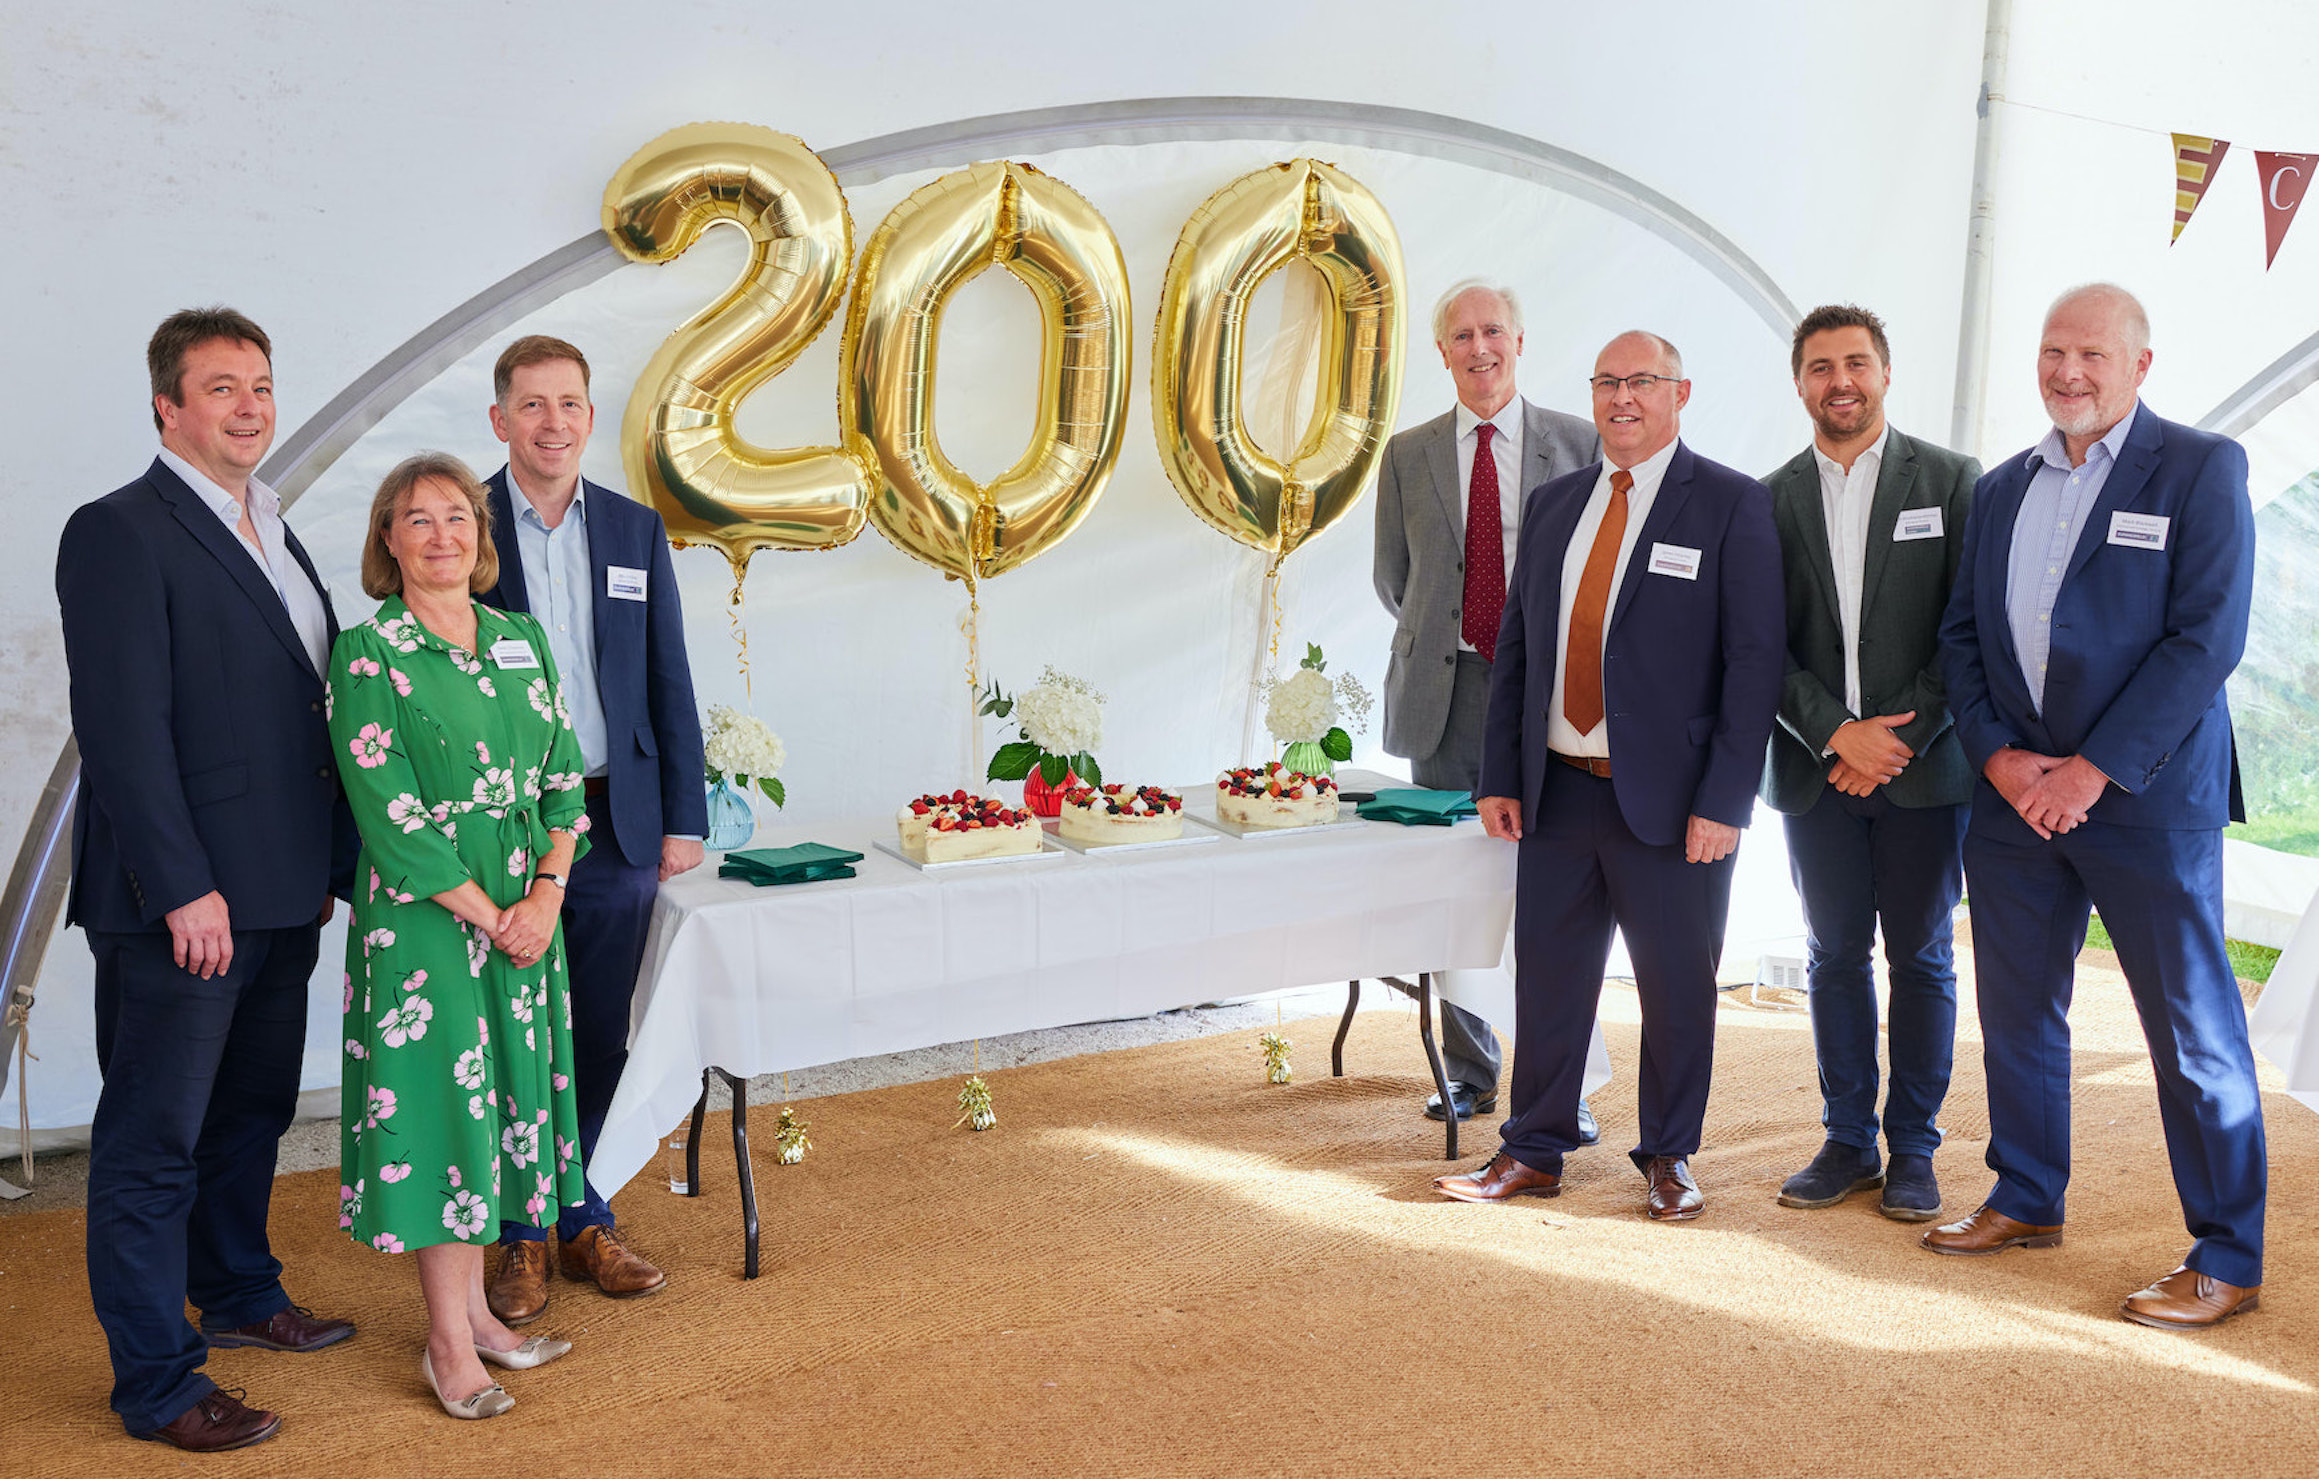 Summerfield and Tauntfield Celebrate 200 Years as a Family Business